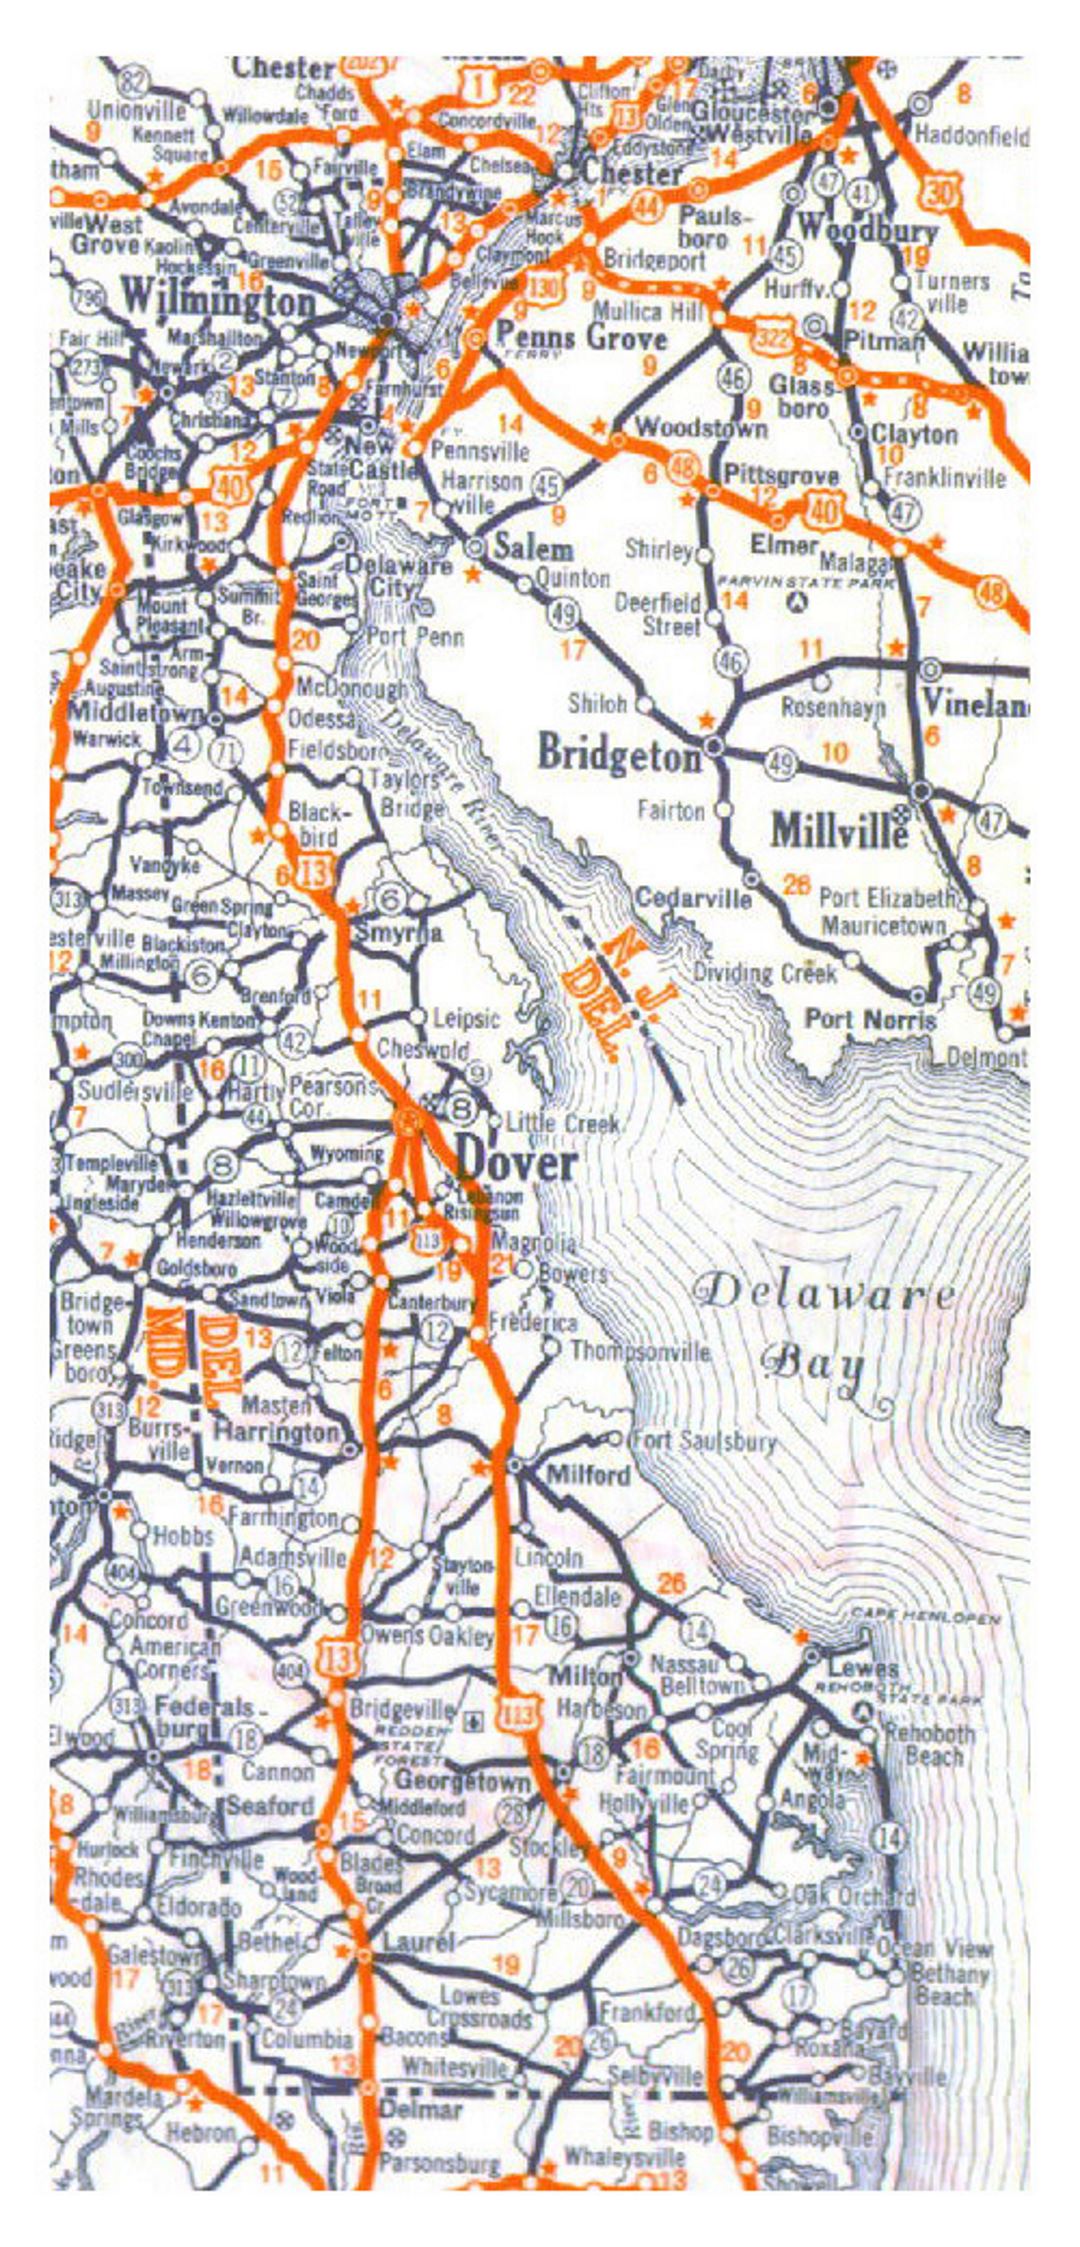 Roads and highways map of Delaware state - 1938